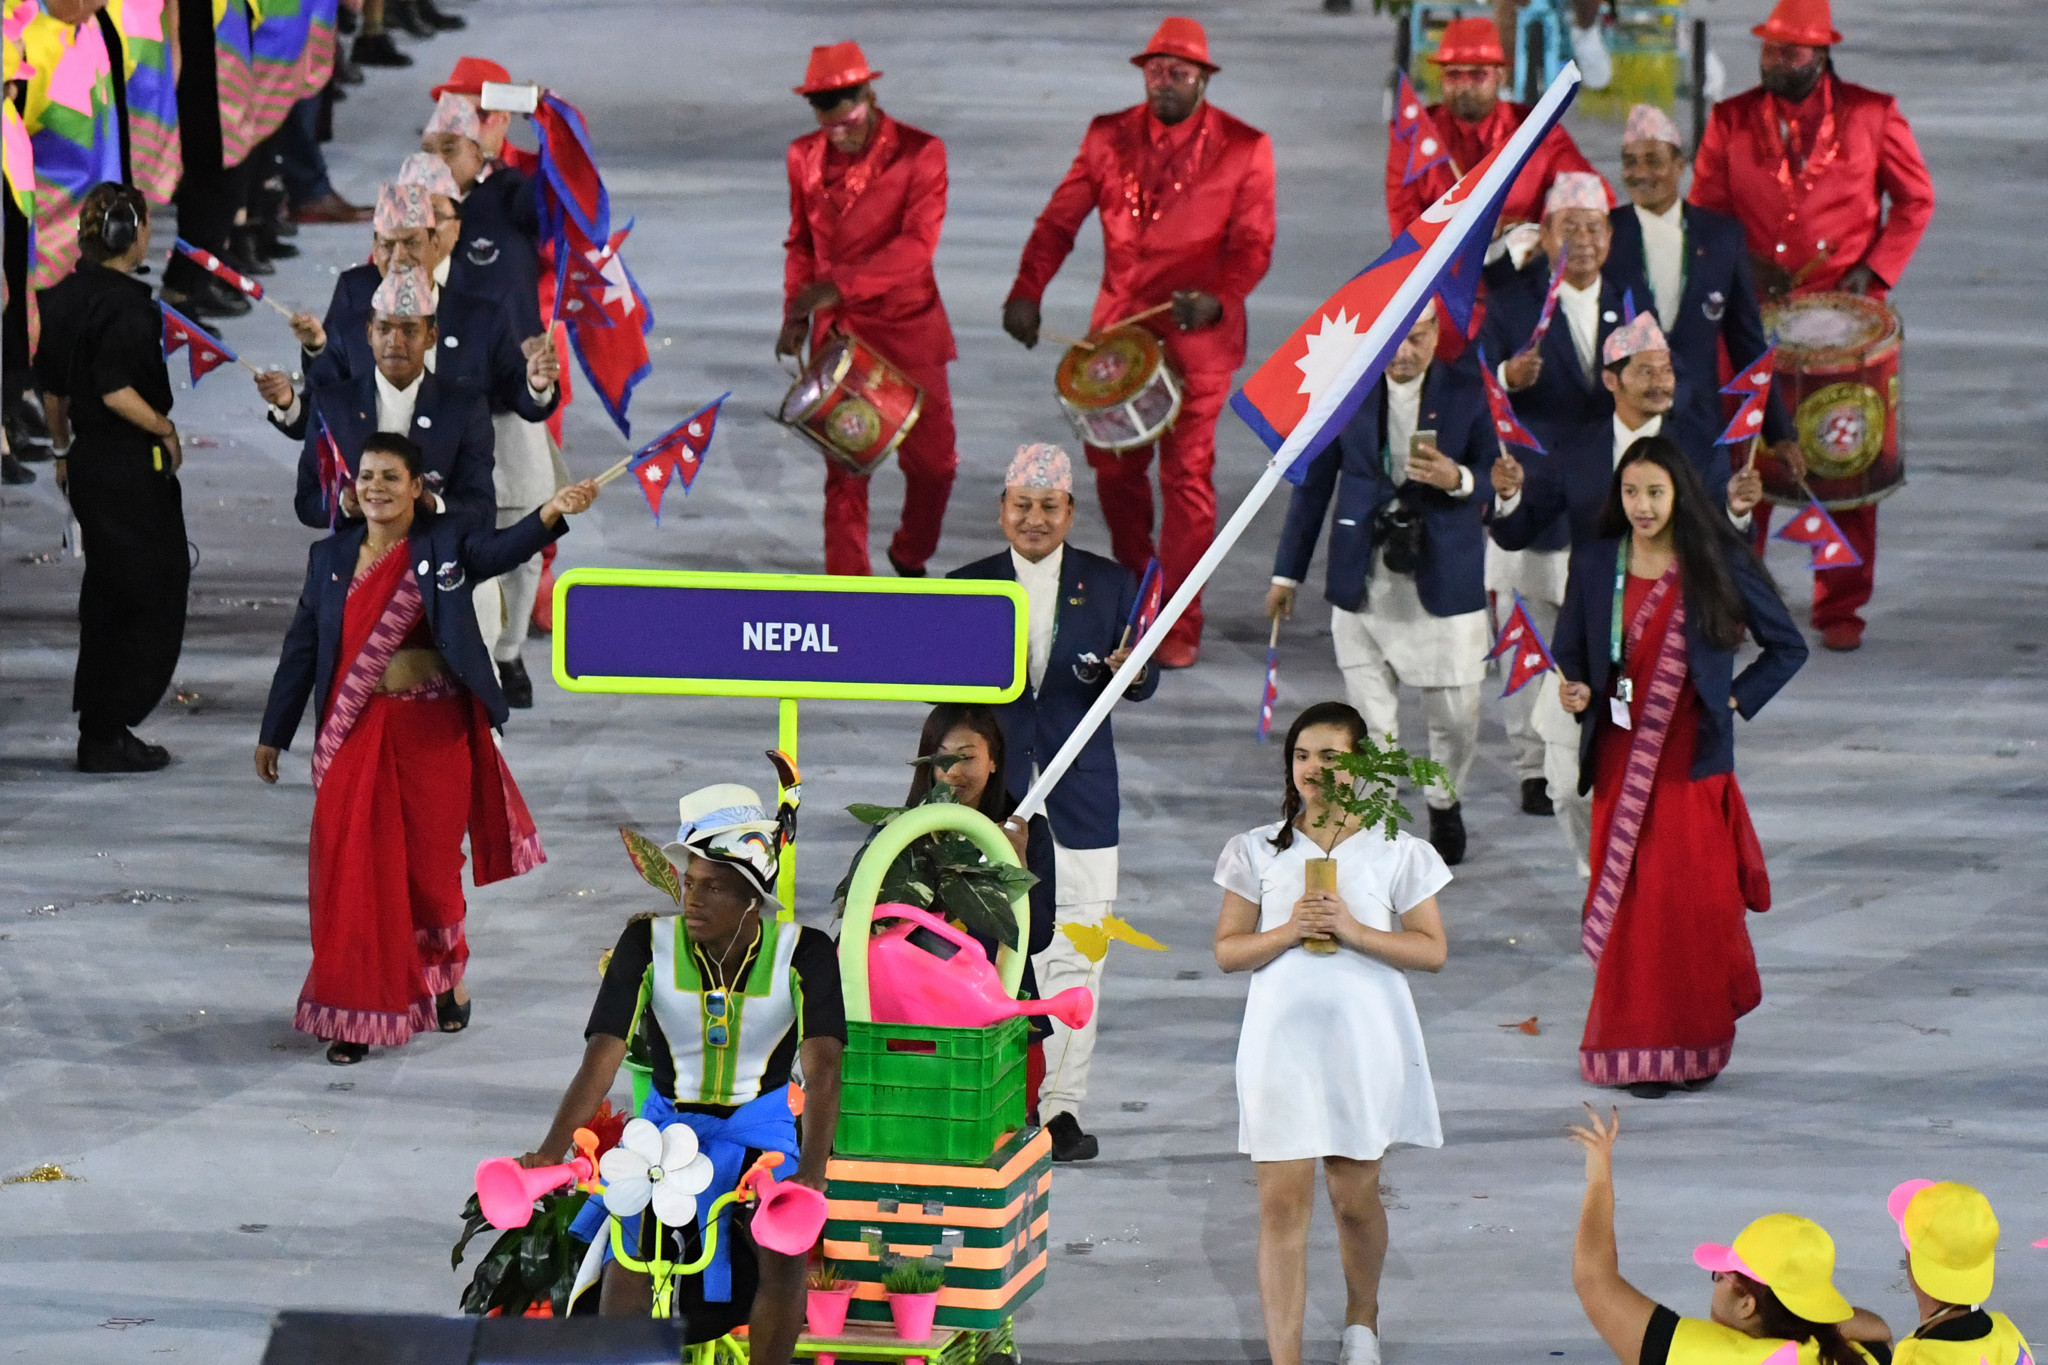 Nepal had seven athletes represent the nation at the Rio 2016 Olympics ©Getty Images